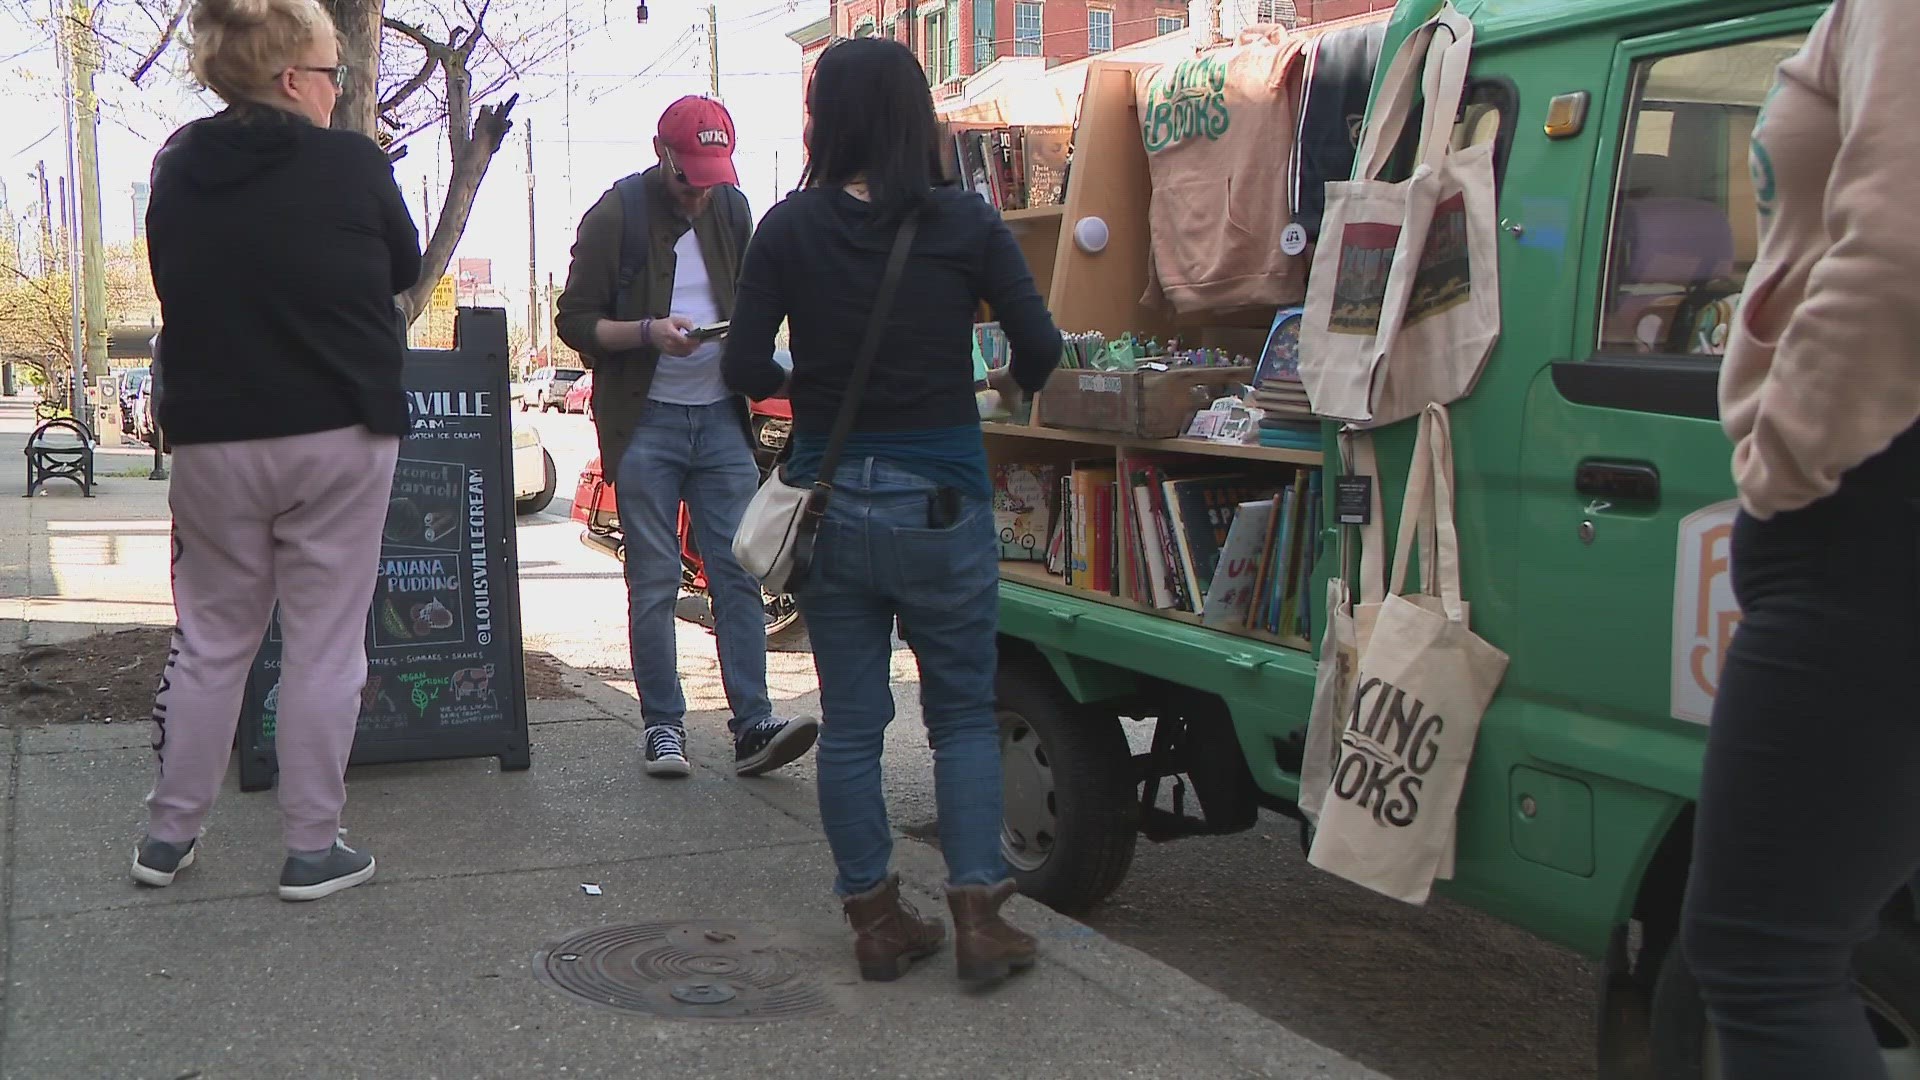 Foxing Books says their mobile, pop-up bookstore travels around Louisville to flea markets, coffee shops and more.